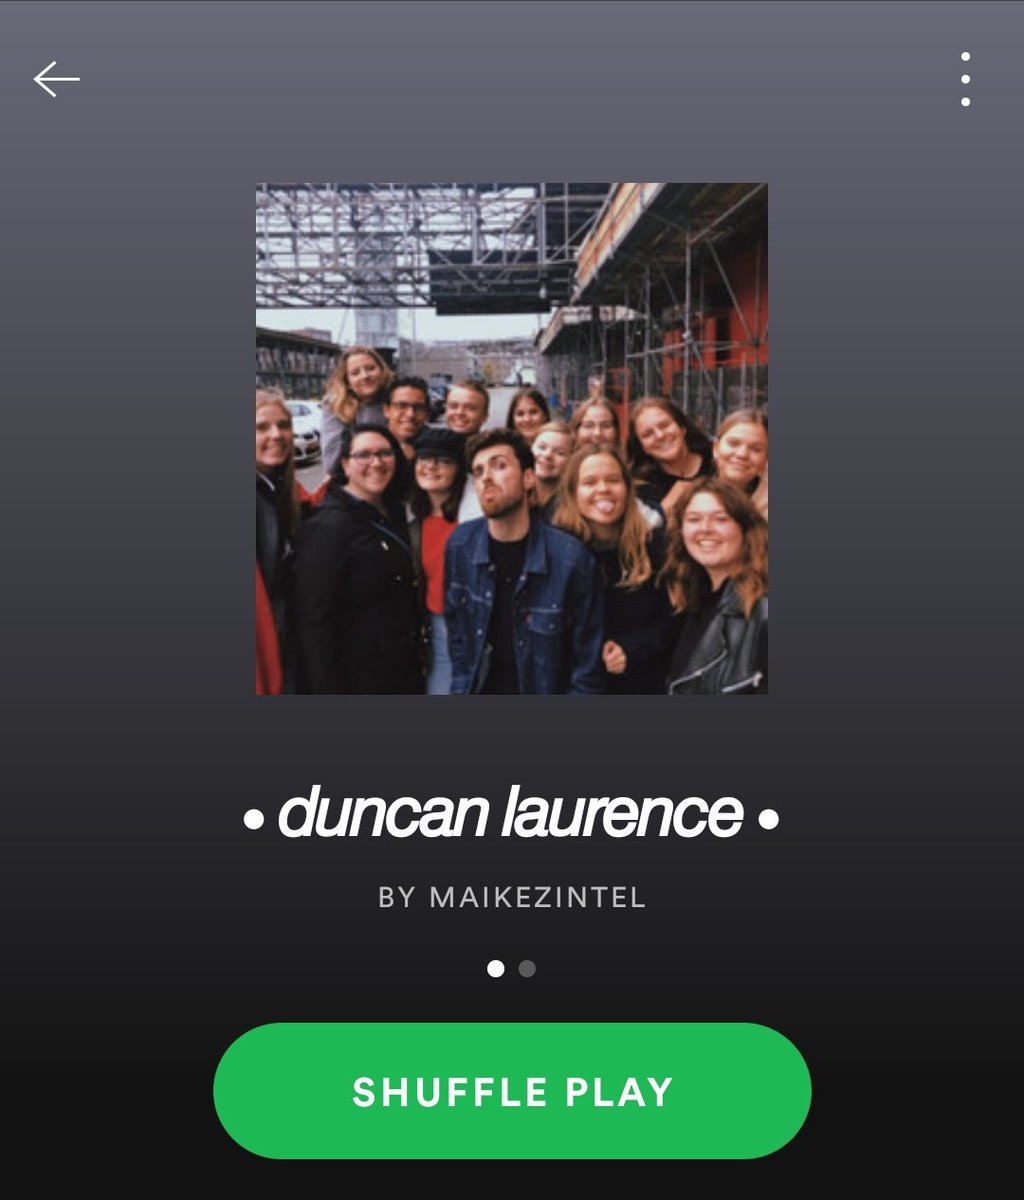 ranking all duncans songs in my playlist (except the Slick and Suited songs and covers)also don't drag me I love them all okay pls be nice thank you